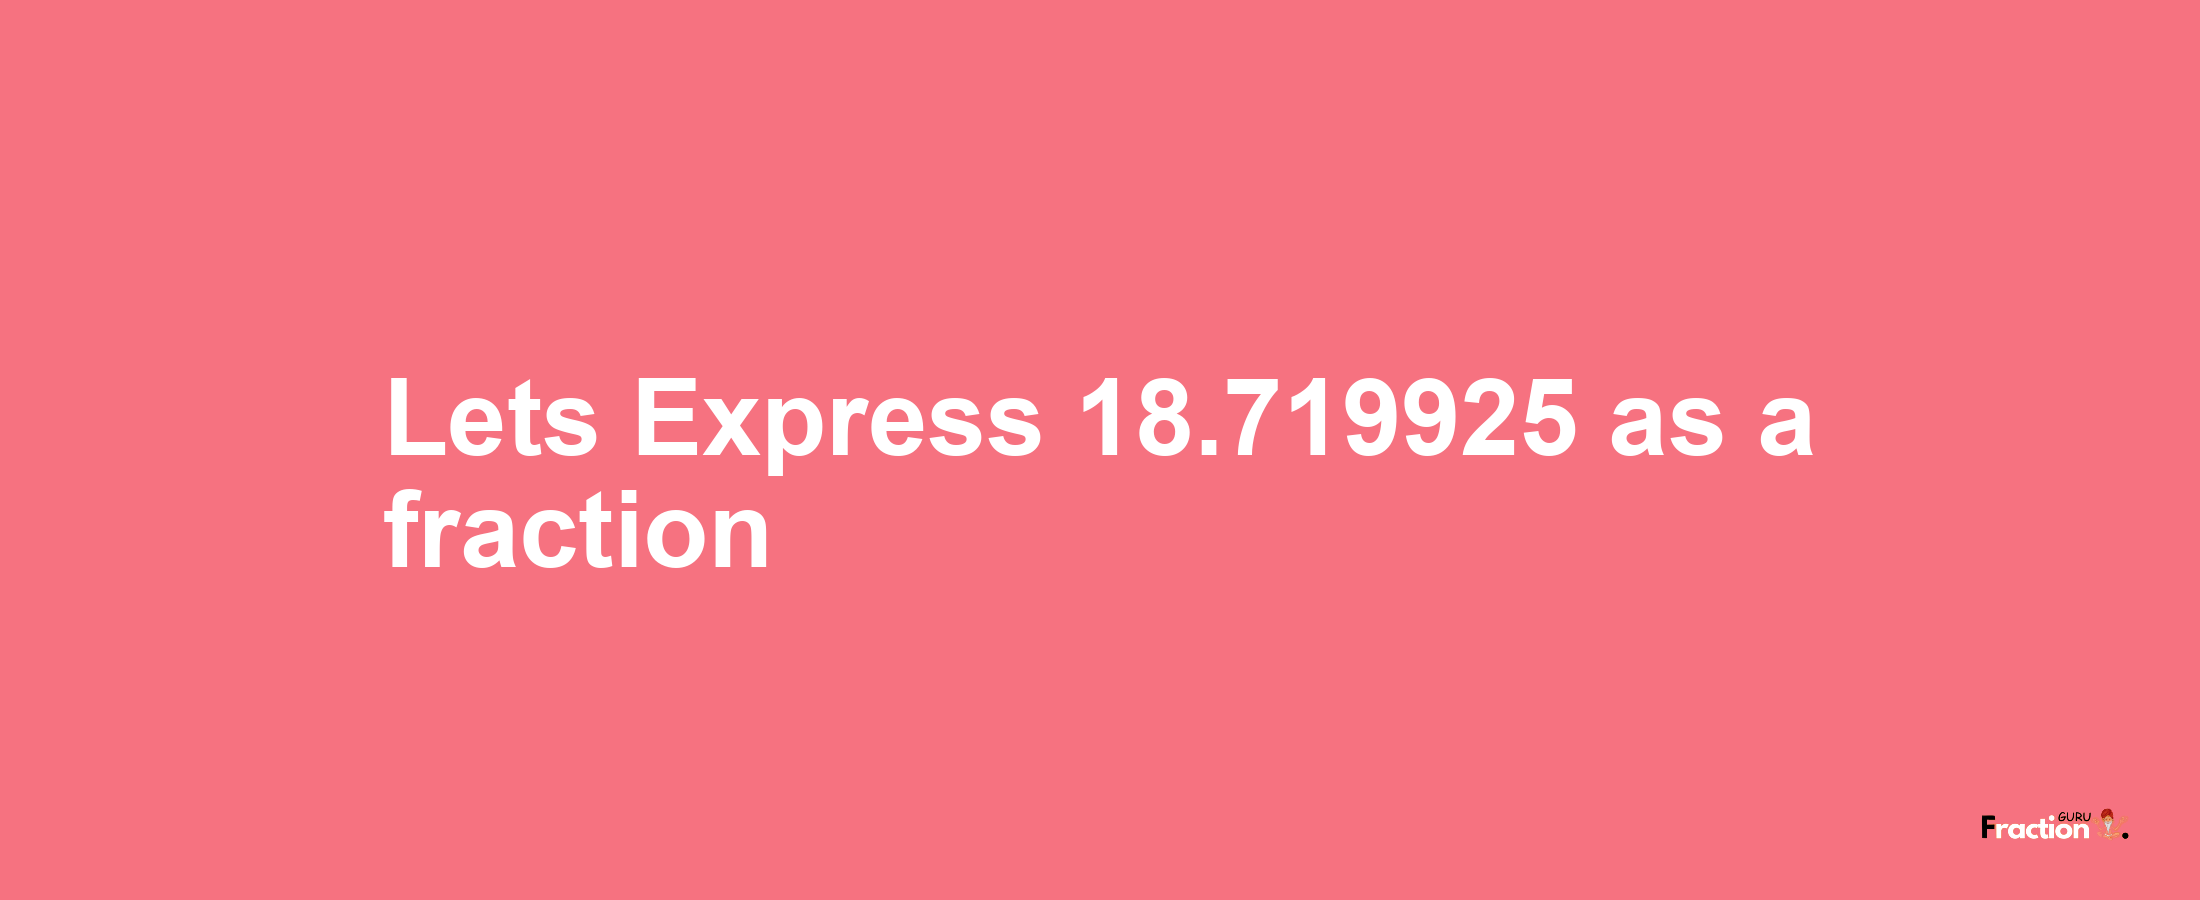 Lets Express 18.719925 as afraction